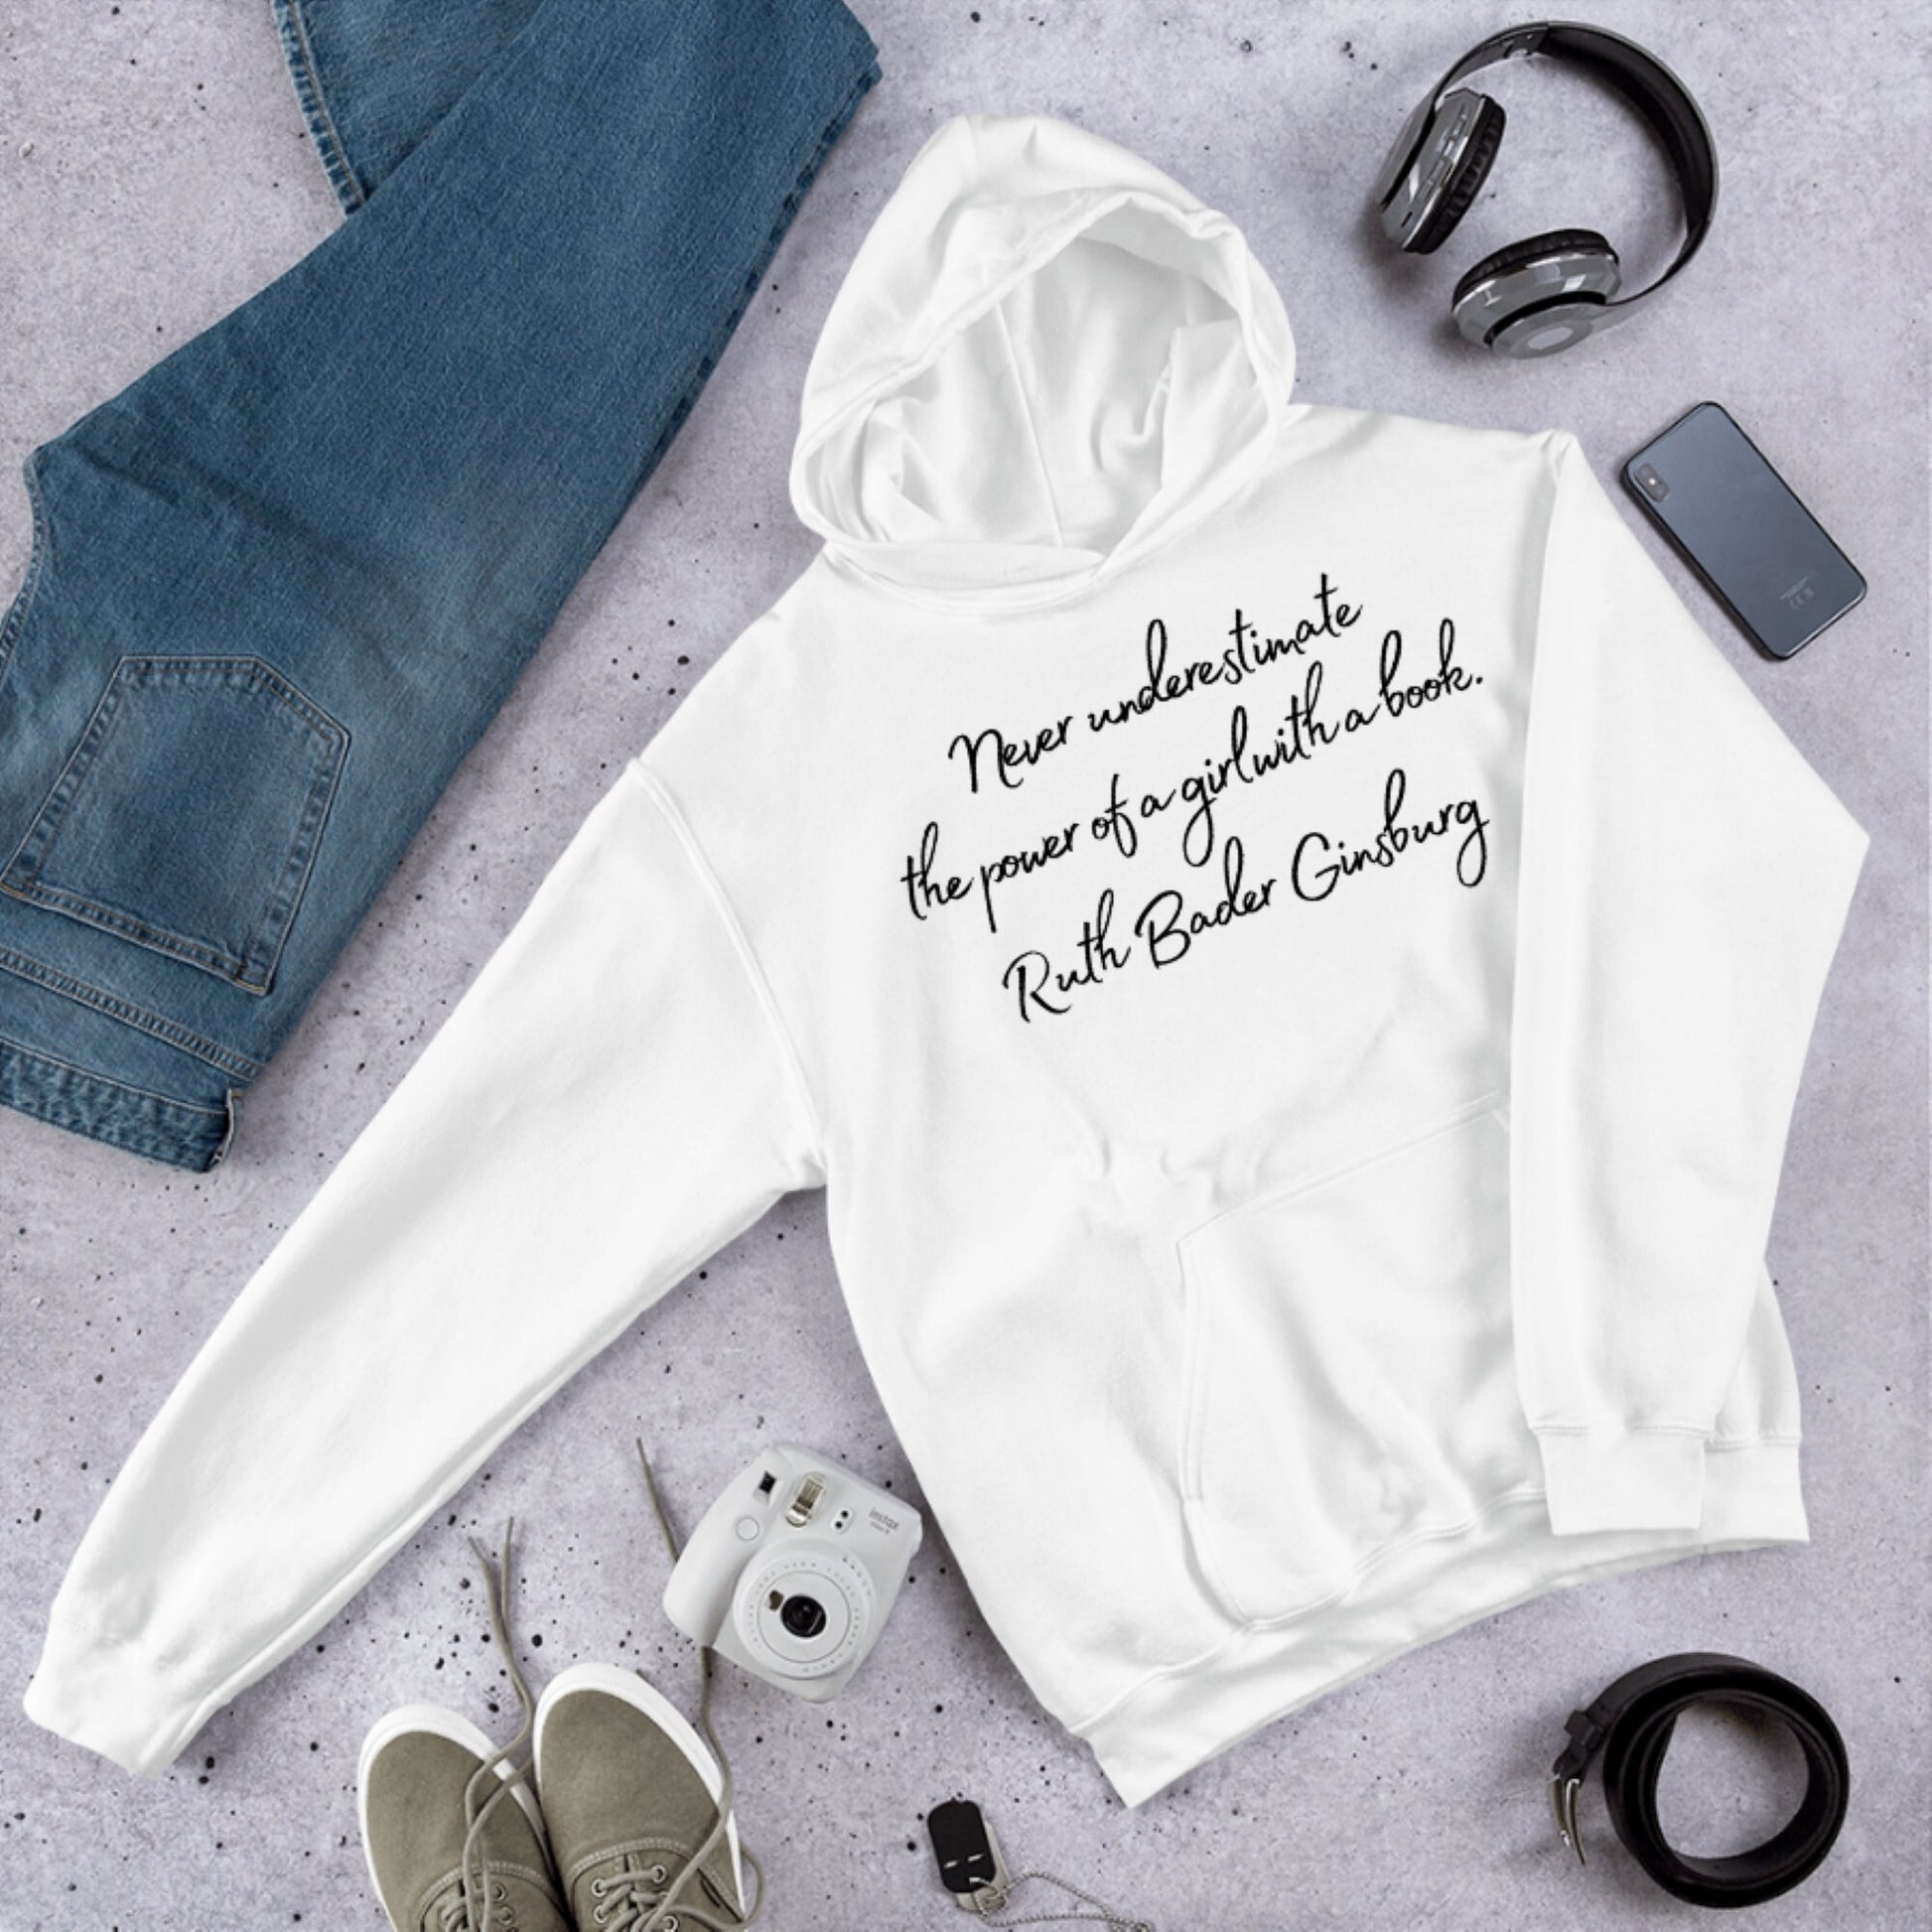 Ruth Bader Ginsburg Never underestimate the power of a girl with a book. Feminist Hoodie